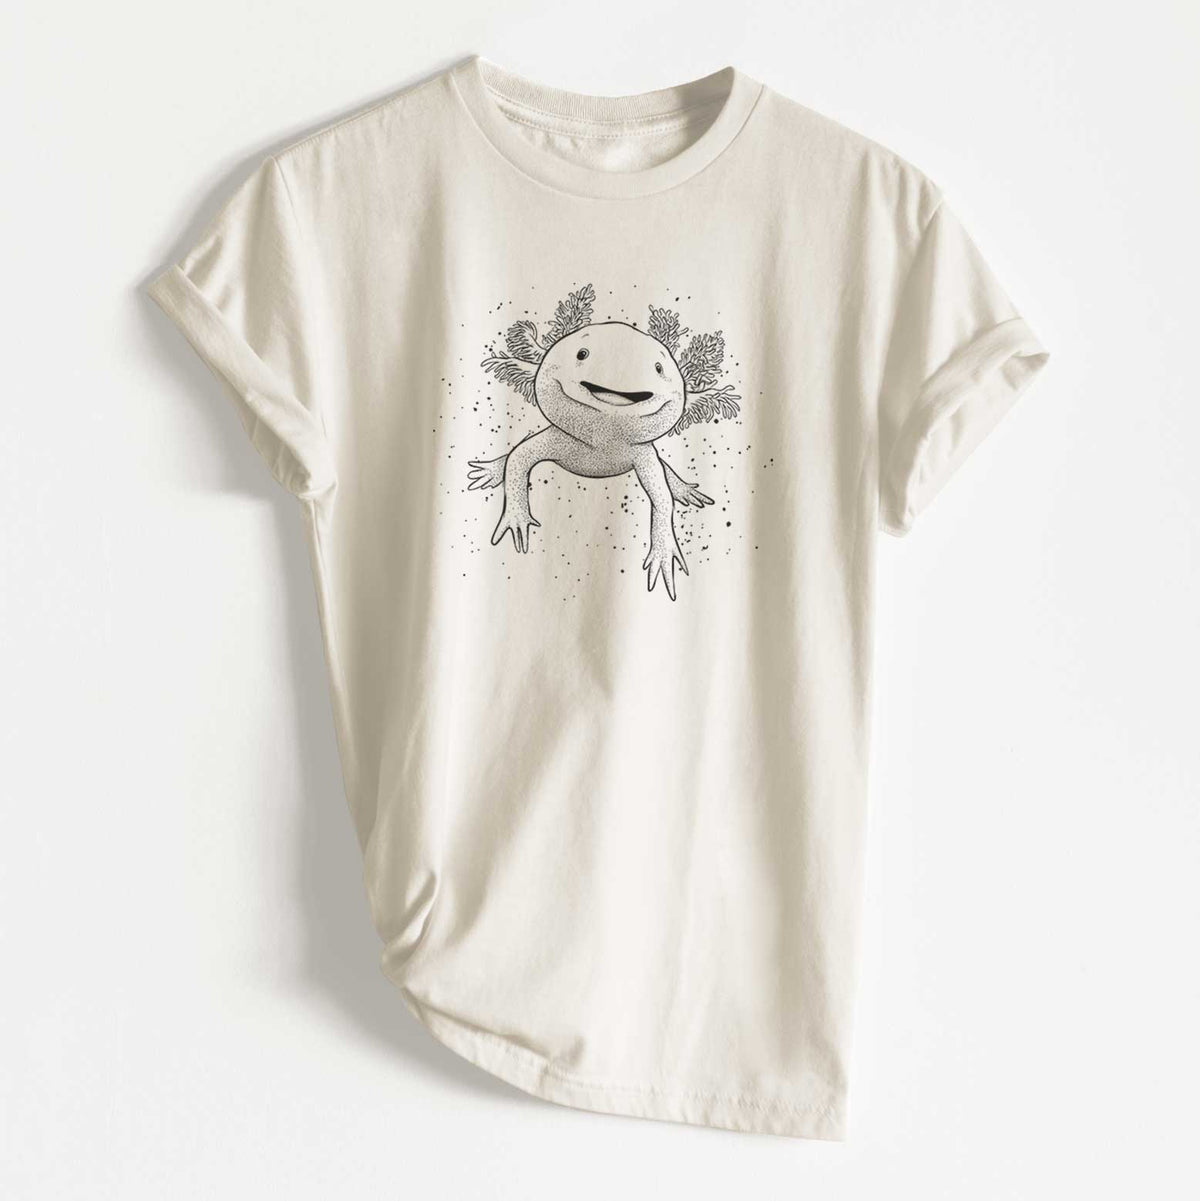 Axolotl - Ambystoma mexicanum - Unisex Recycled Eco Tee  - CLOSEOUT - FINAL SALE